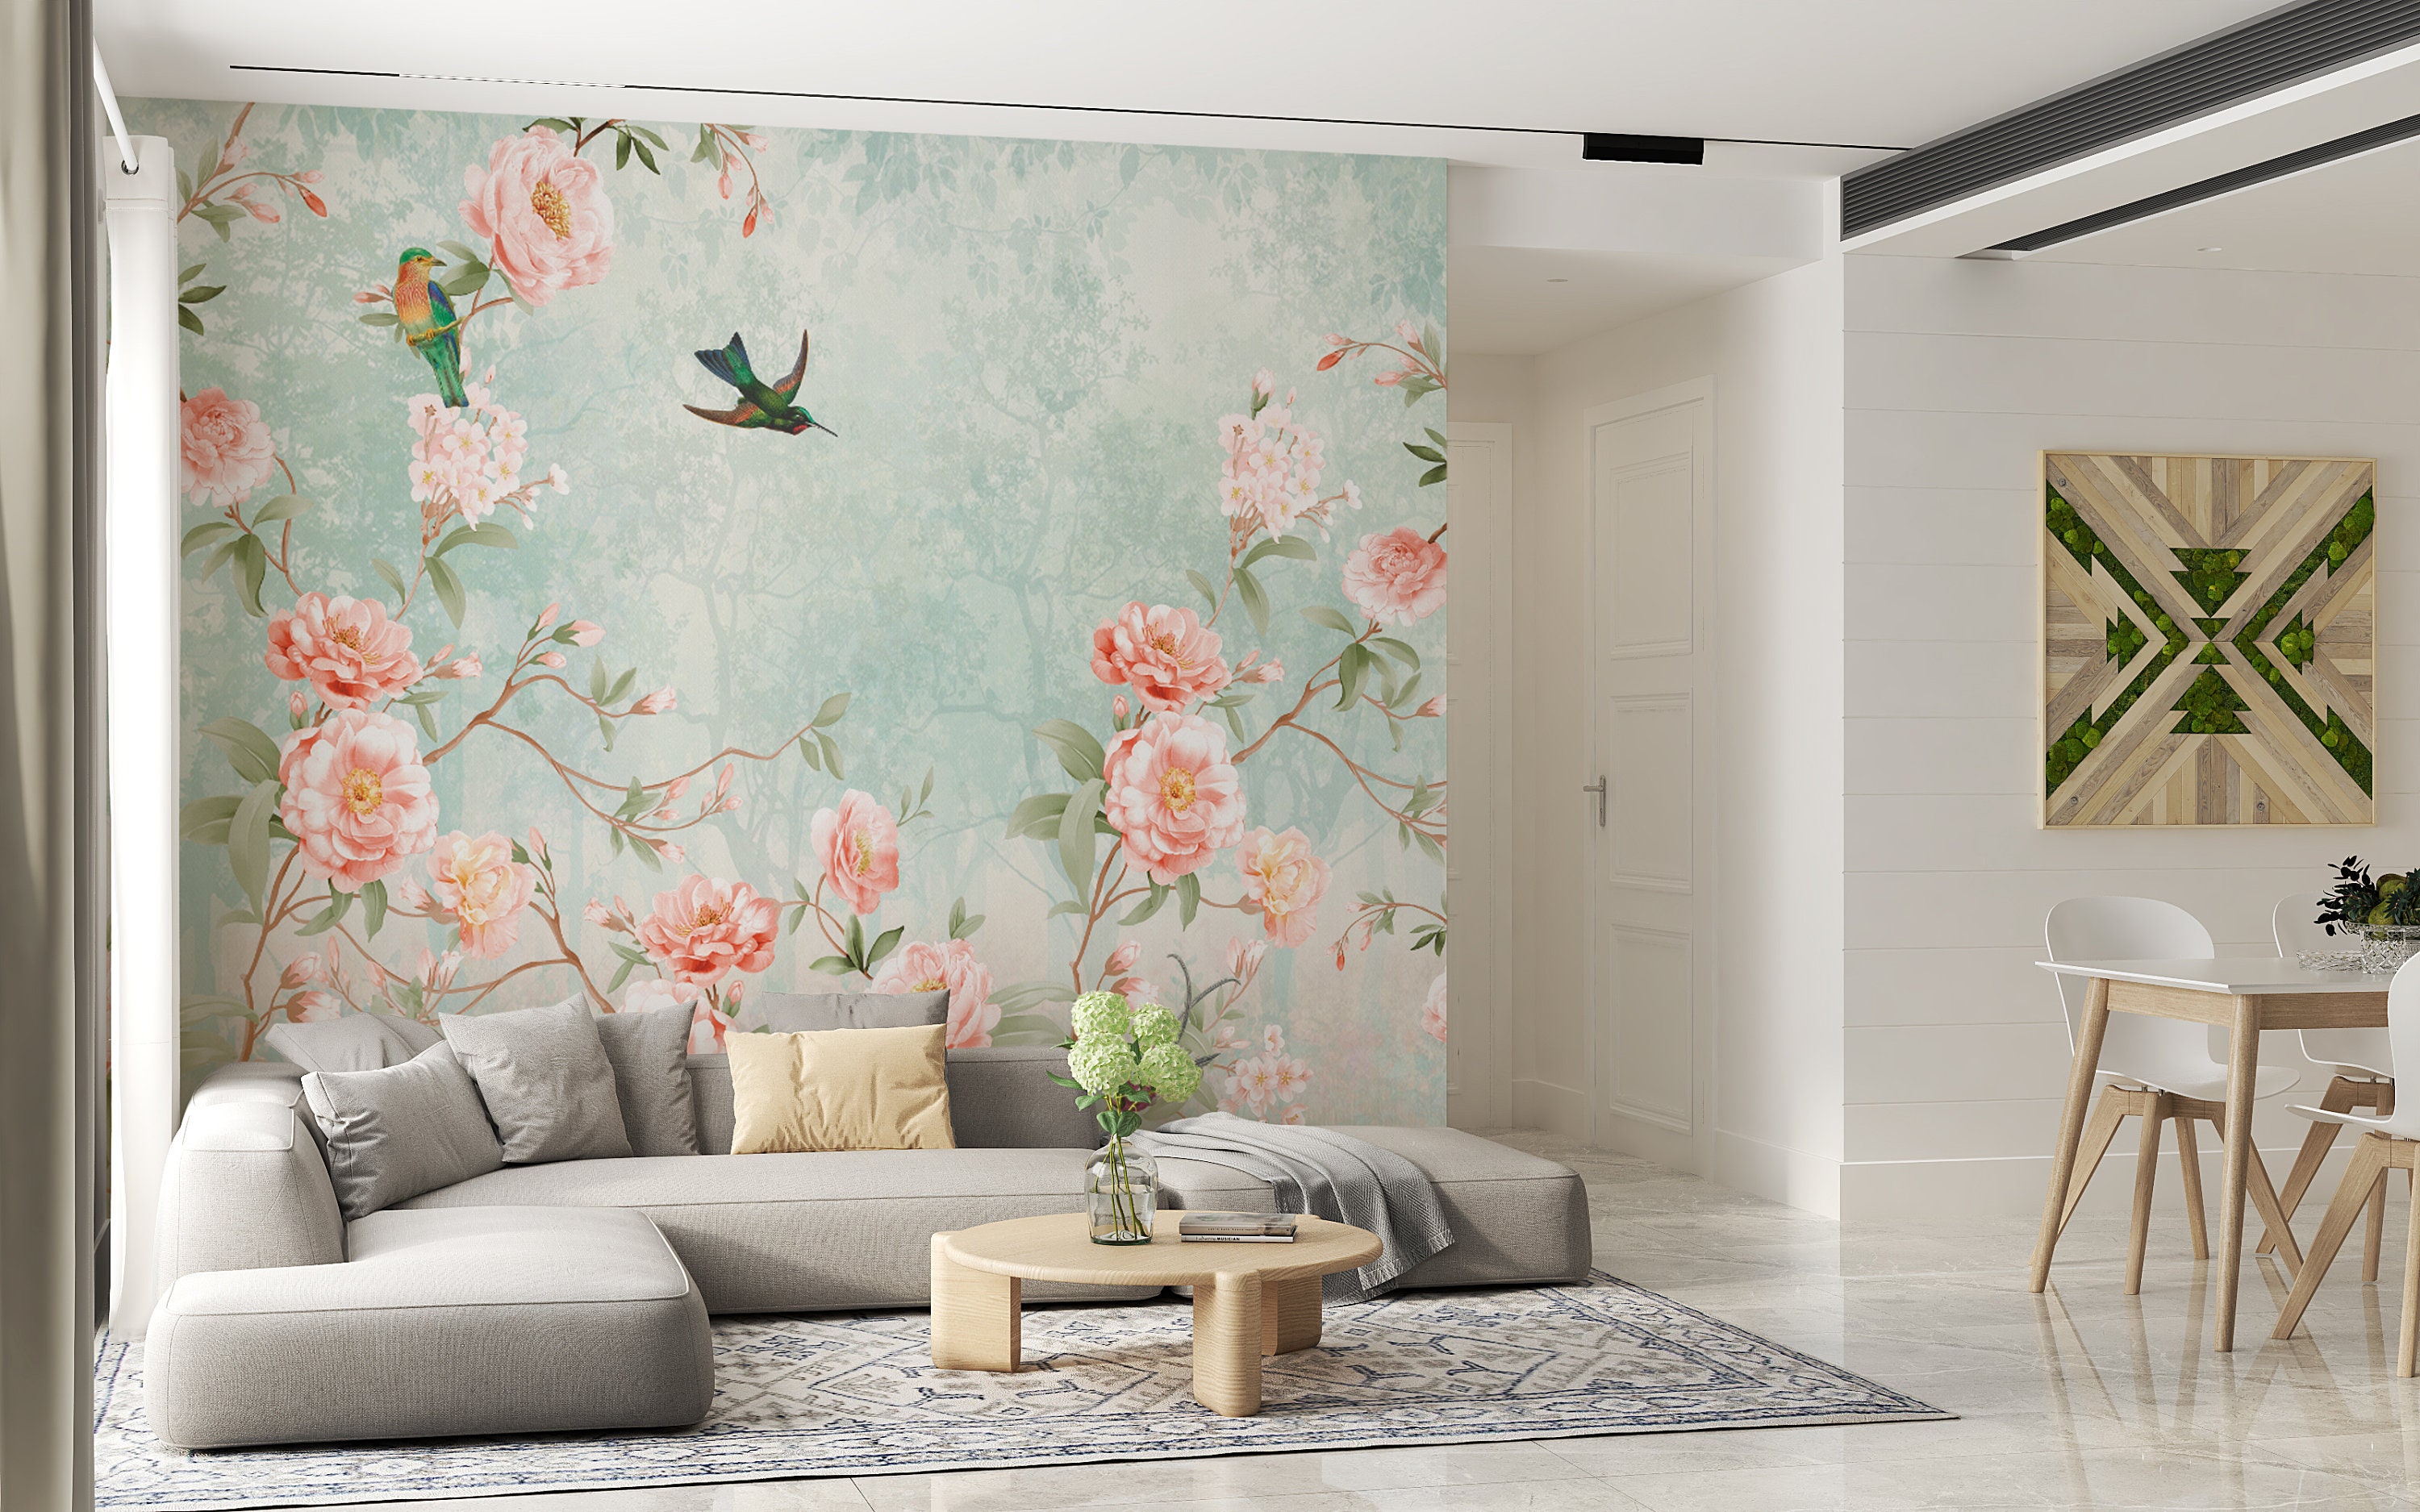 Paloma Home Vintage Chinoiserie Wallpaper Blossom  PinkTealGreen  Matte  Finish  921502  Amazoncouk DIY  Tools